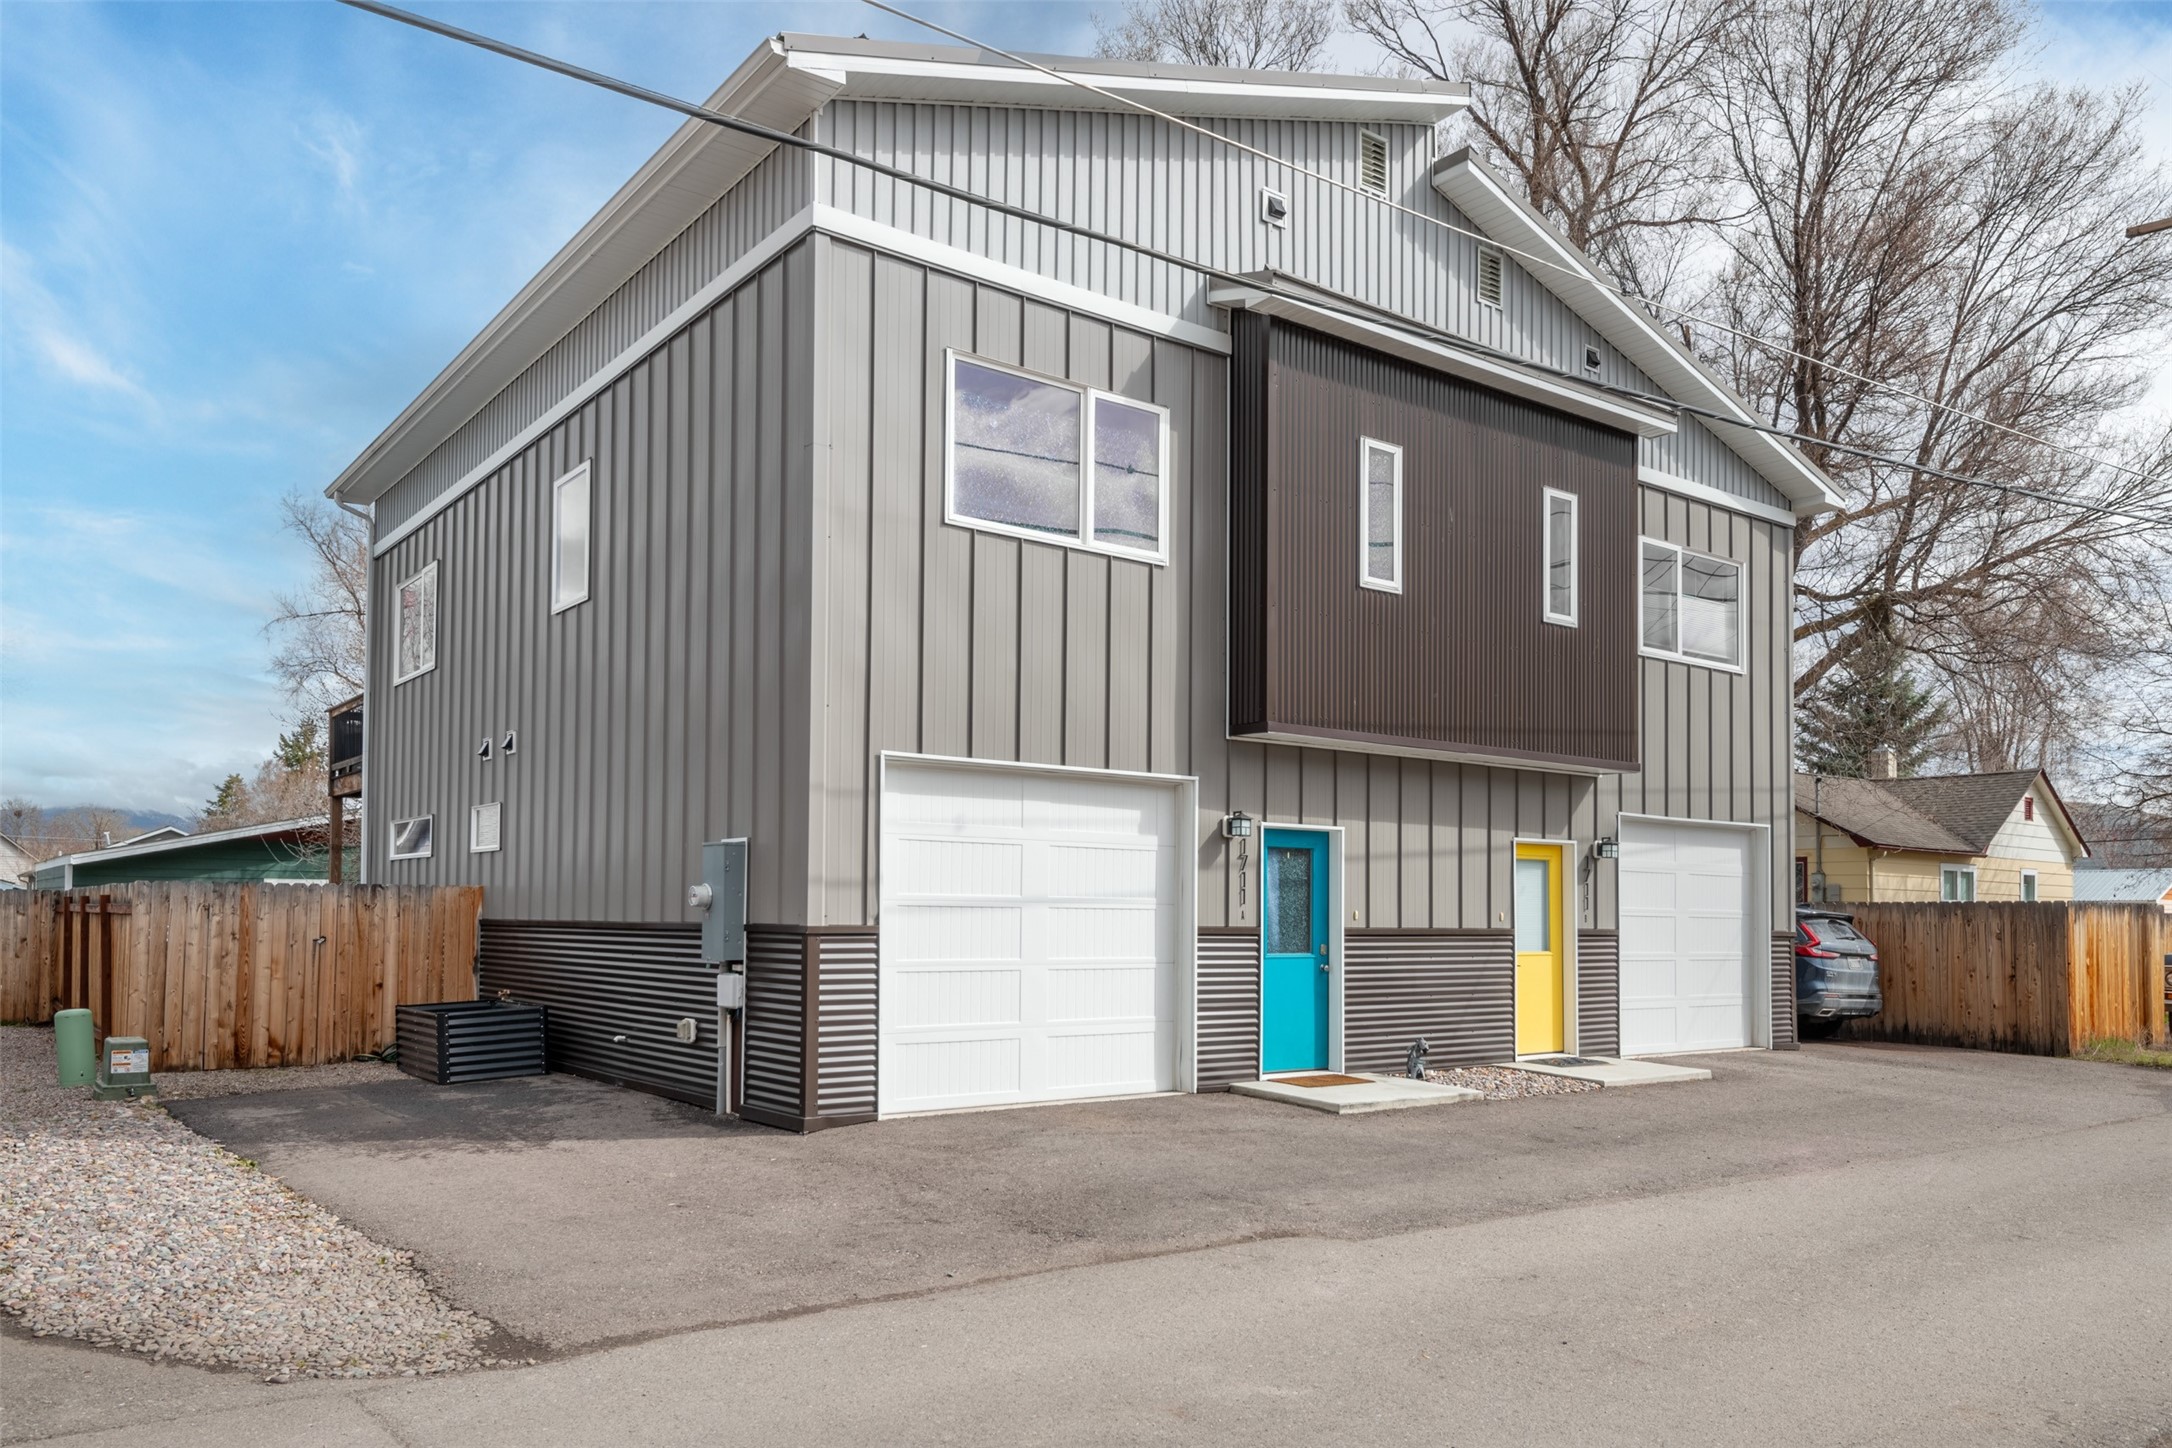 NOW OFFERING $2000 BUYER CLOSING COST CREDIT IF UNDER CONTRACT BY 5/22! This 2018-built alley townhouse boasts 3 bedrooms, 2 full bathrooms, an upper-level deck, and a small fenced yard, offering the perfect blend of comfort and ease. Features include lofty 10-ft ceilings, a large main-level primary suite, plus 2 bedrooms and a full bathroom upstairs. The open-concept kitchen boasts quartz counters, tile backsplash, stainless steel appliances, and mountain views. Enjoy sunny days grilling & relaxing on your 2nd-floor balcony & make use of the small fenced yard for pets or gardening. With light covenants, no HOA dues, short-term rentals permitted, all electric appliances, mini split-based HVAC, and low-maintenance metal roof/siding, this home offers hassle-free living. The deep 1-car garage provides room for your car and all your gear. Located in the vibrant Franklin to the Fort neighborhood, with easy access to public transportation, the Milwaukee trail, downtown, and entertainment. This duplex townhome was designed by architect NC Design Studio and completed in 2018. The primary suite is large enough for a sitting area in addition to a king sized bed, and is situated to the rear of the main level, with backyard access. A laundry area with a stacked washer and dryer is tucked under the stairs on the main level. The second level living/dining/kitchen area is above the surrounding rooftops, among the greenery of the trees, giving owners privacy and views of the surrounding mountains. The one shared wall is well-insulated, as well as being along the stairway wall, and the current owners and neighbors report little to no noise transfer.